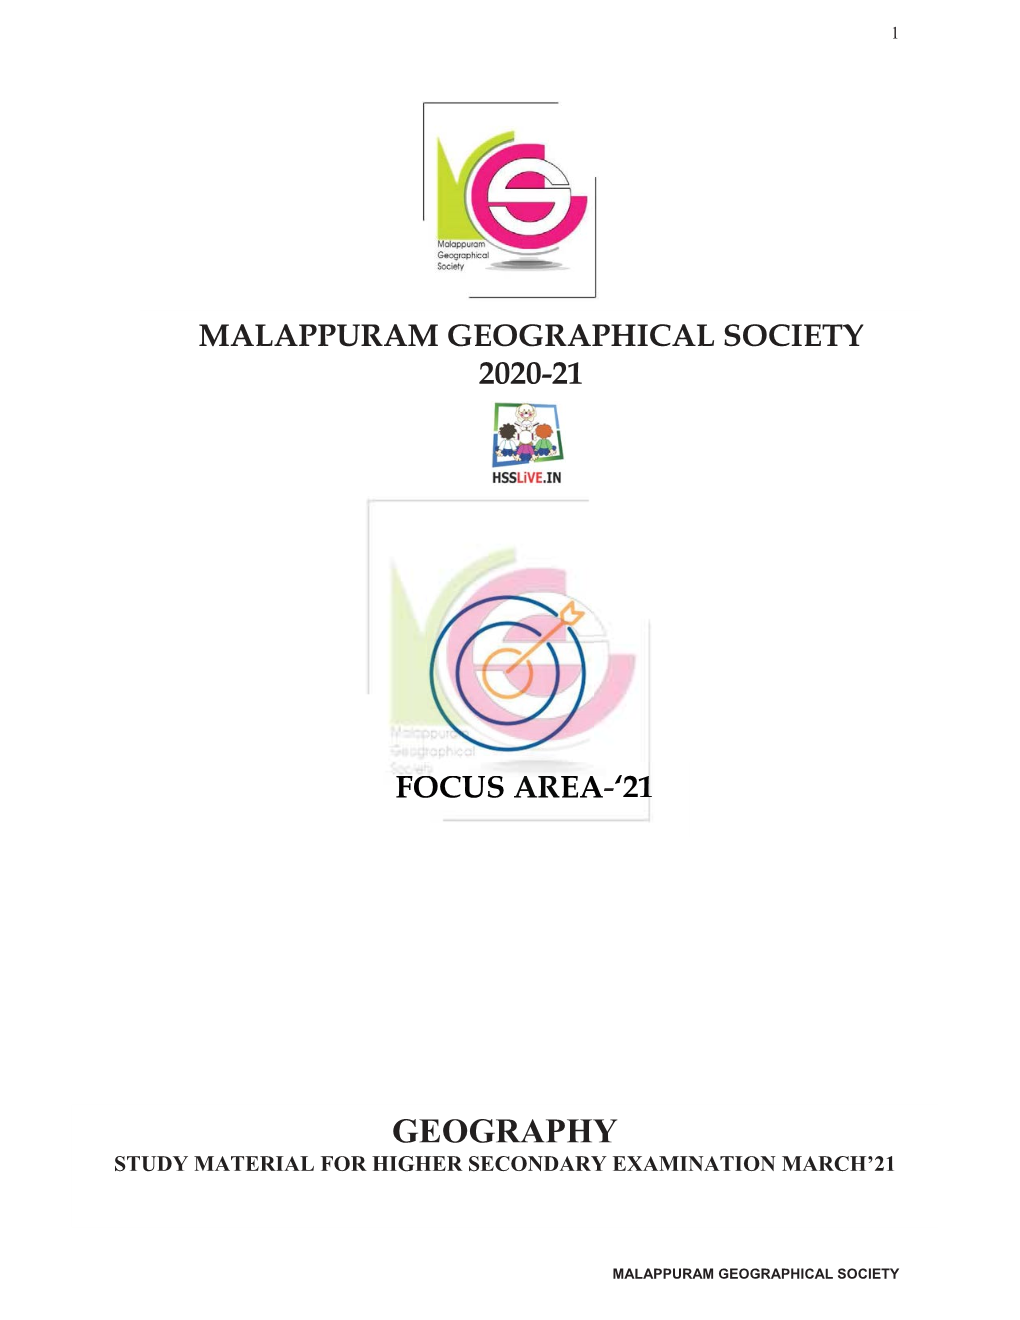 Geography Study Material for Higher Secondary Examination March’21